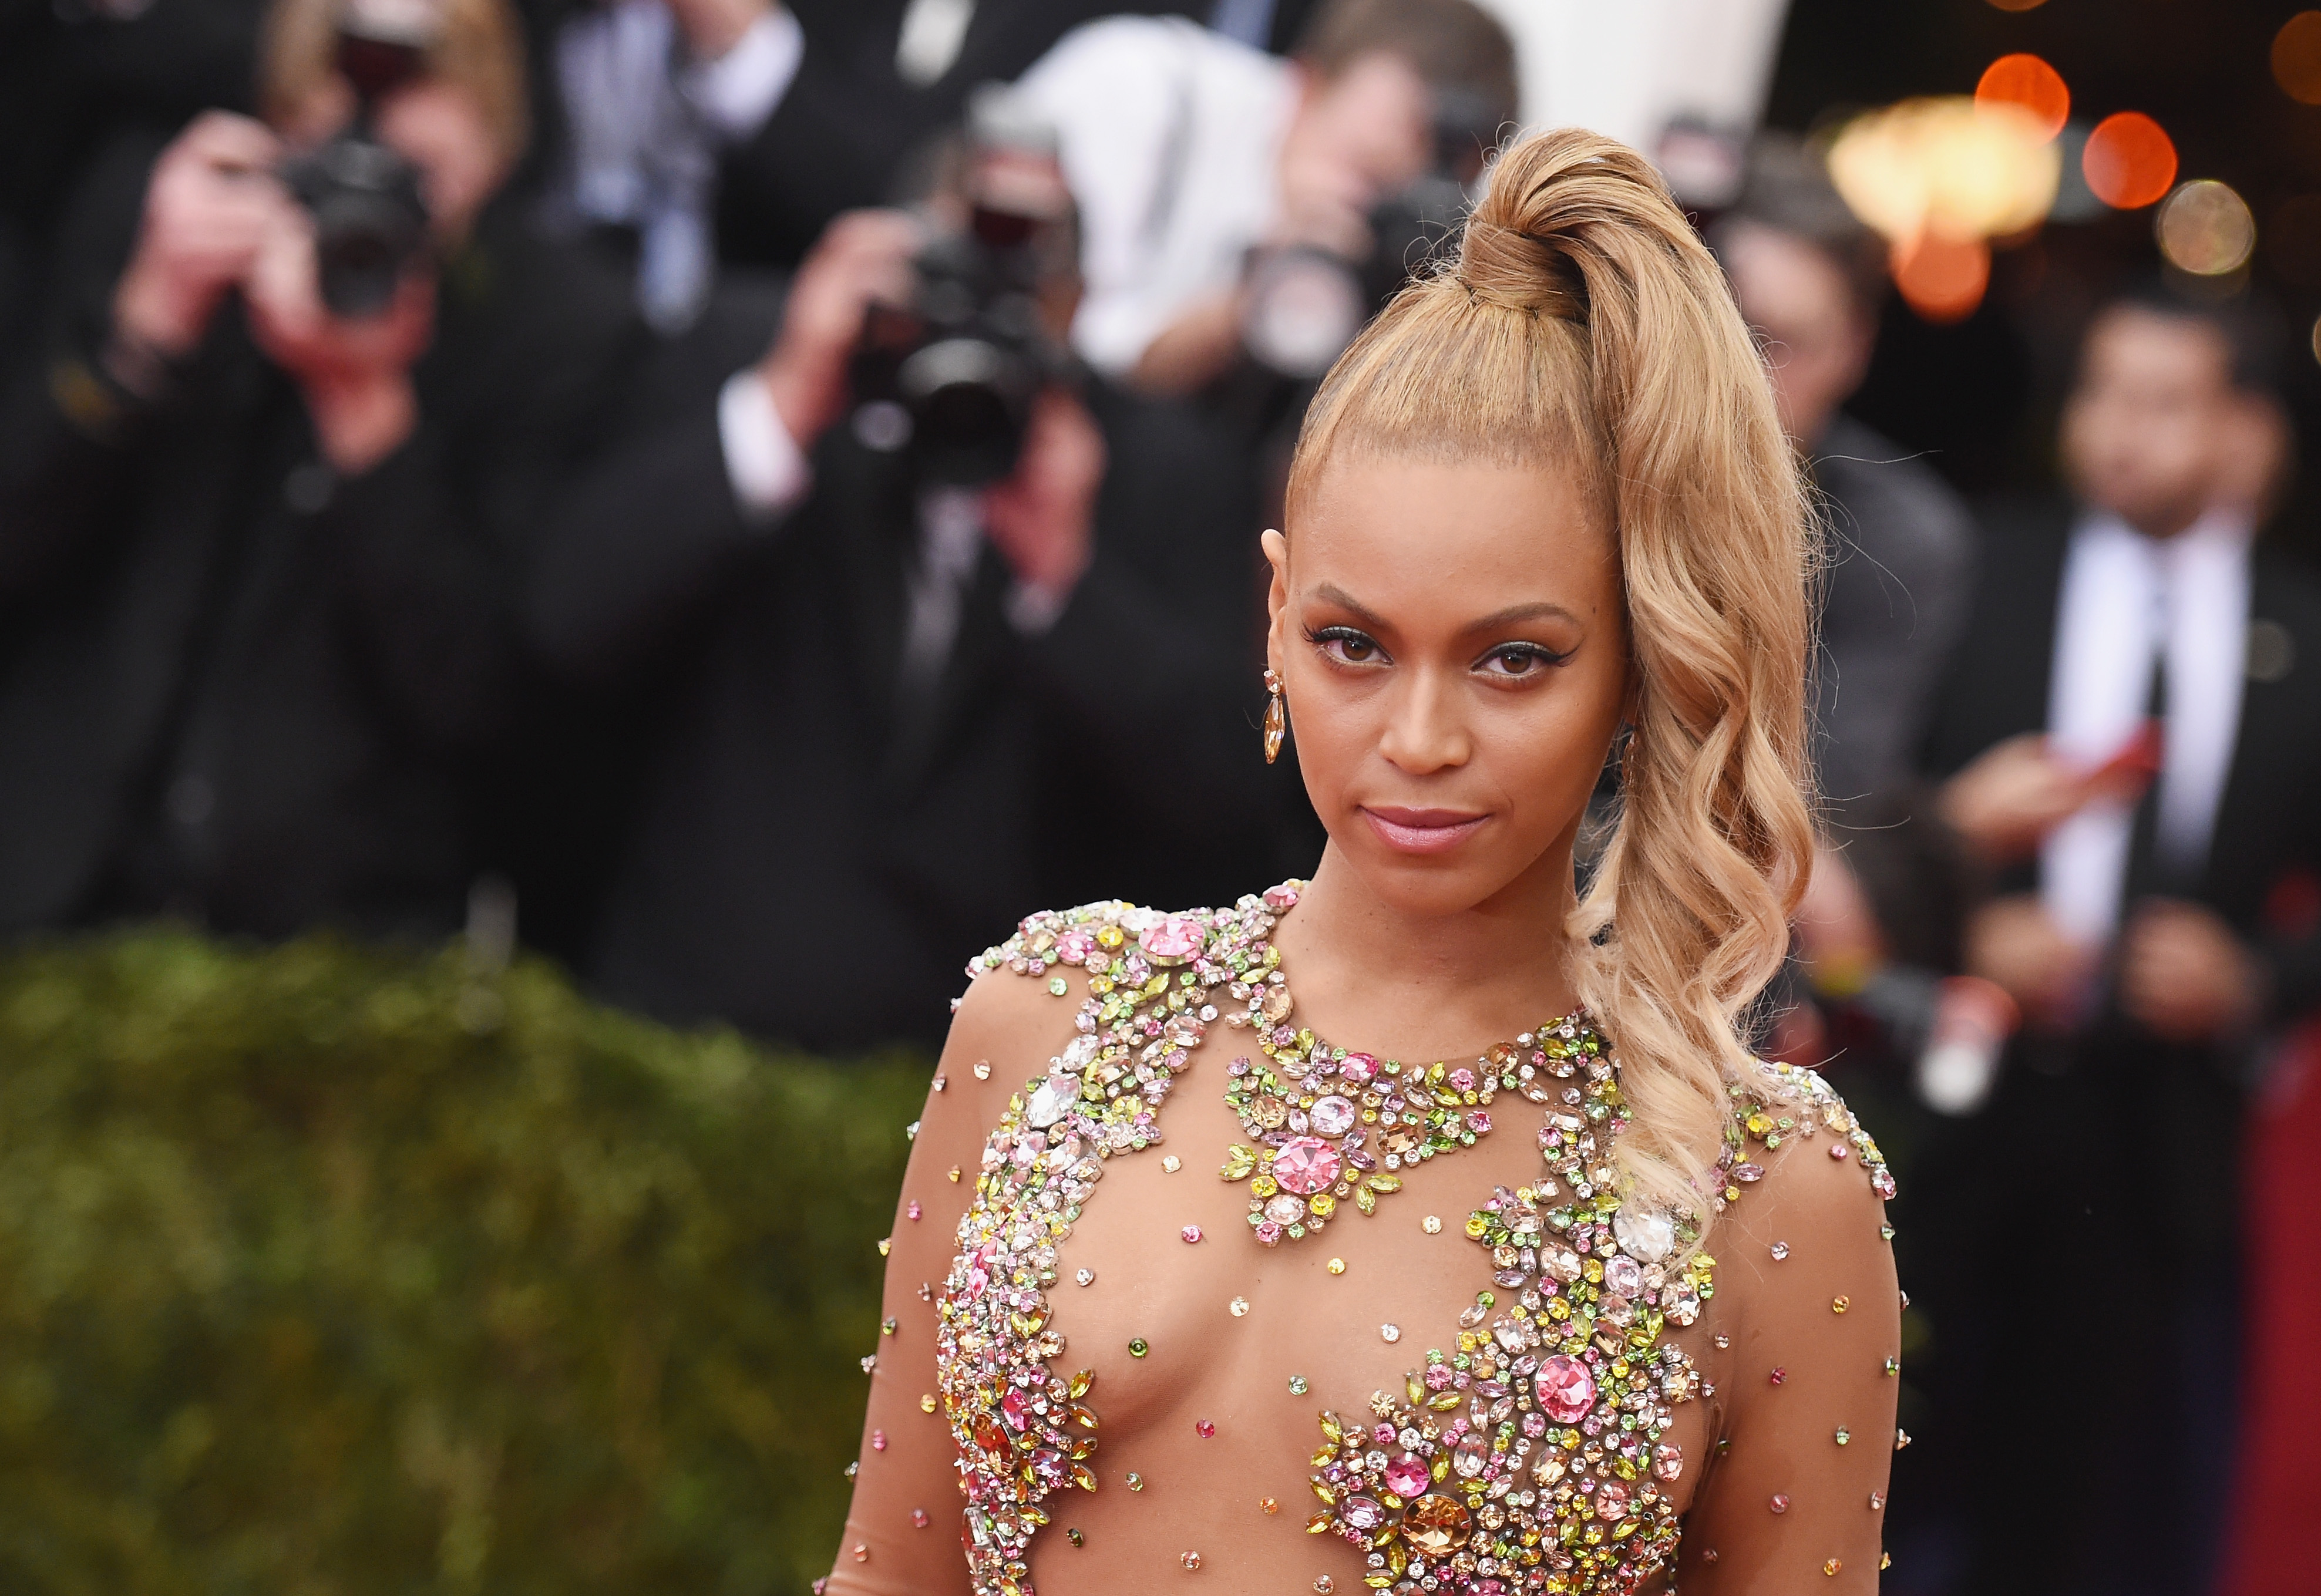 Beyonce attends the MET Gala in New York City on May 4, 2015. (Mike Coppola—Getty Images)